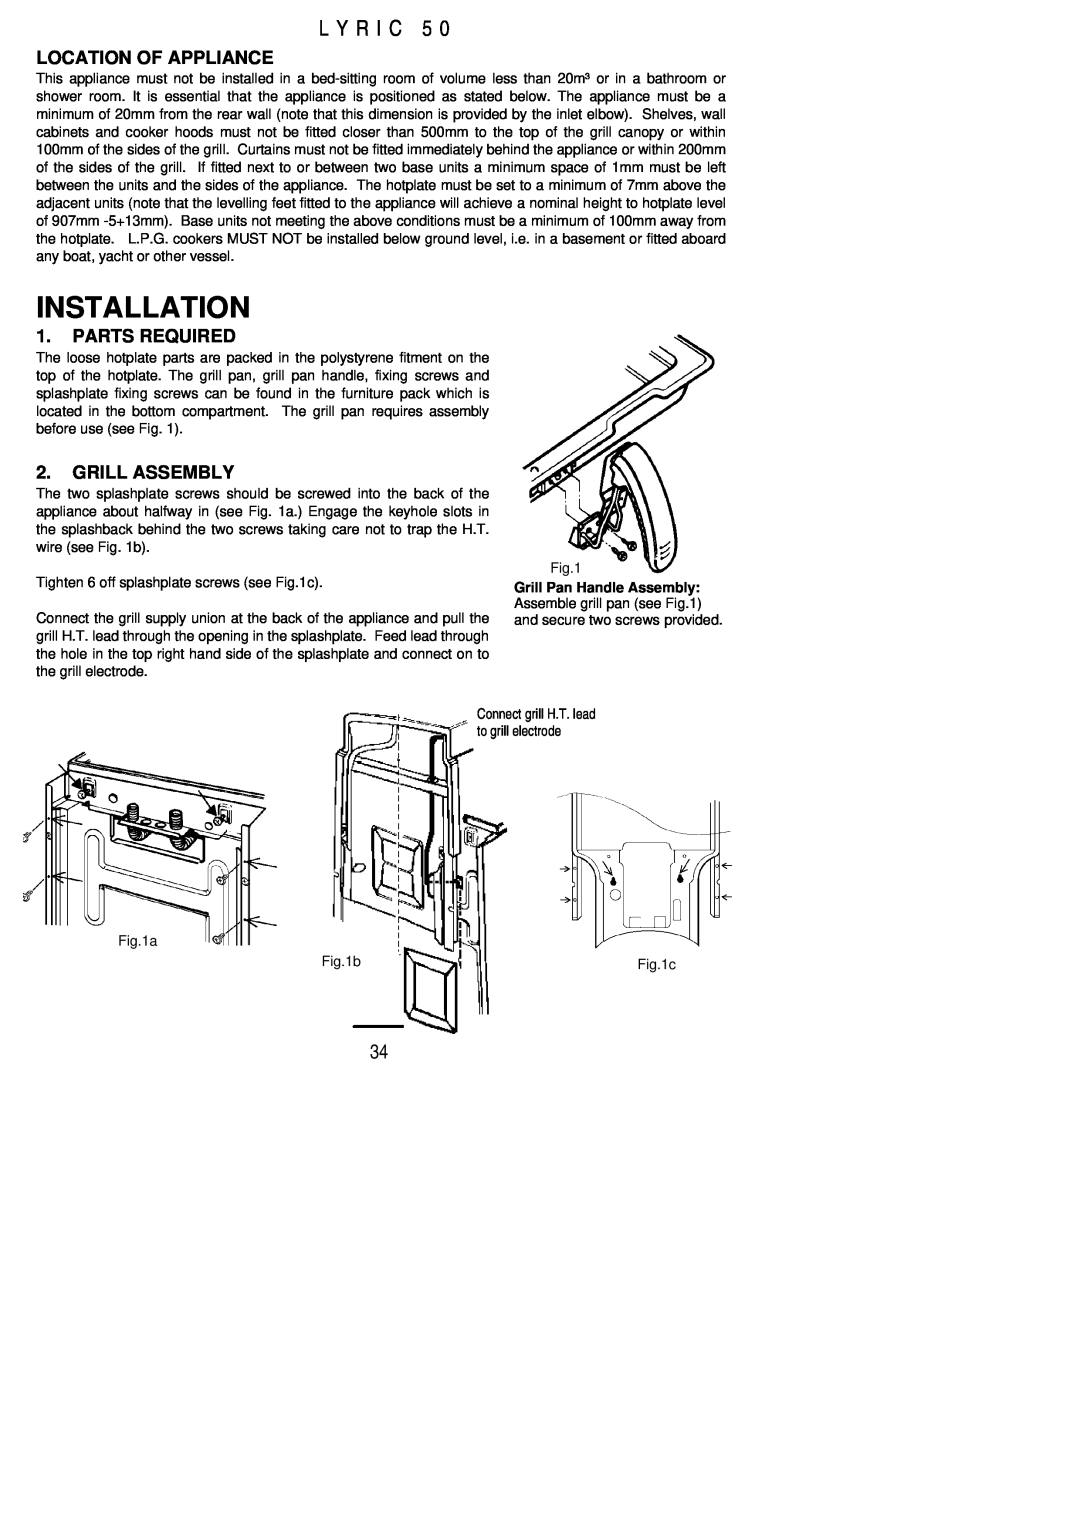 Electrolux LYRIC50 installation instructions Installation, L Y R I C, Location Of Appliance, Parts Required, Grill Assembly 